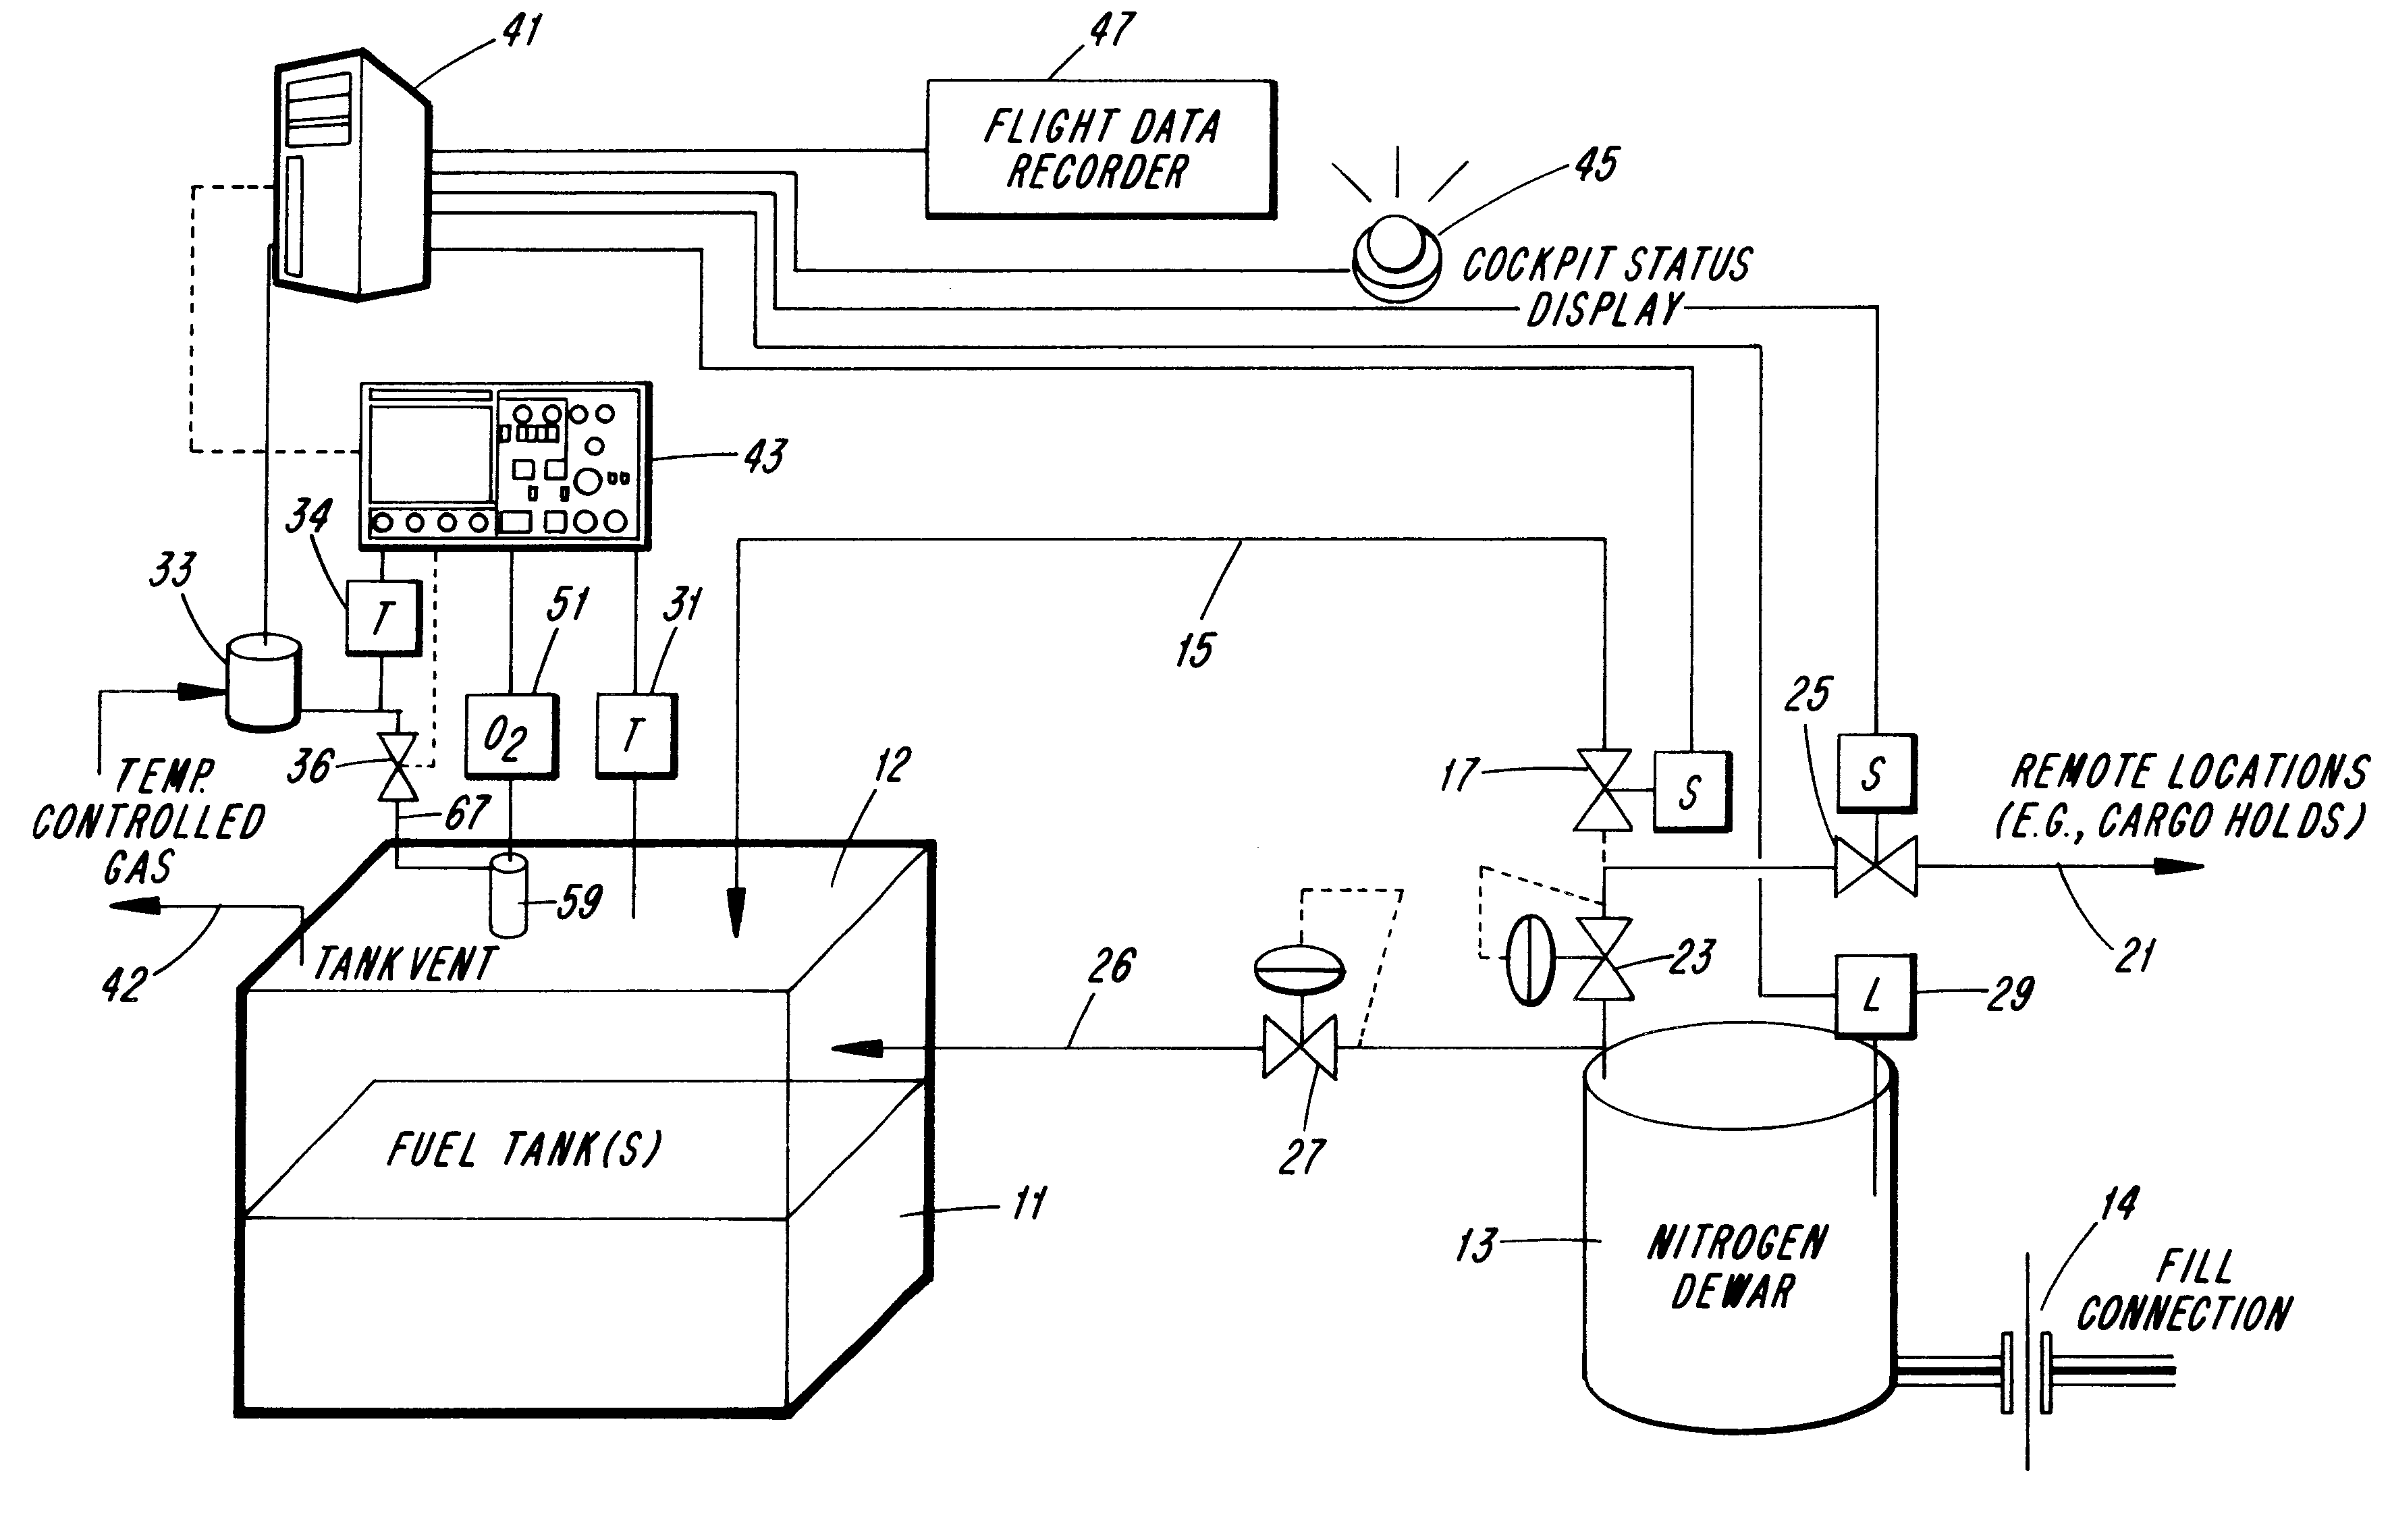 On-board fuel inerting system